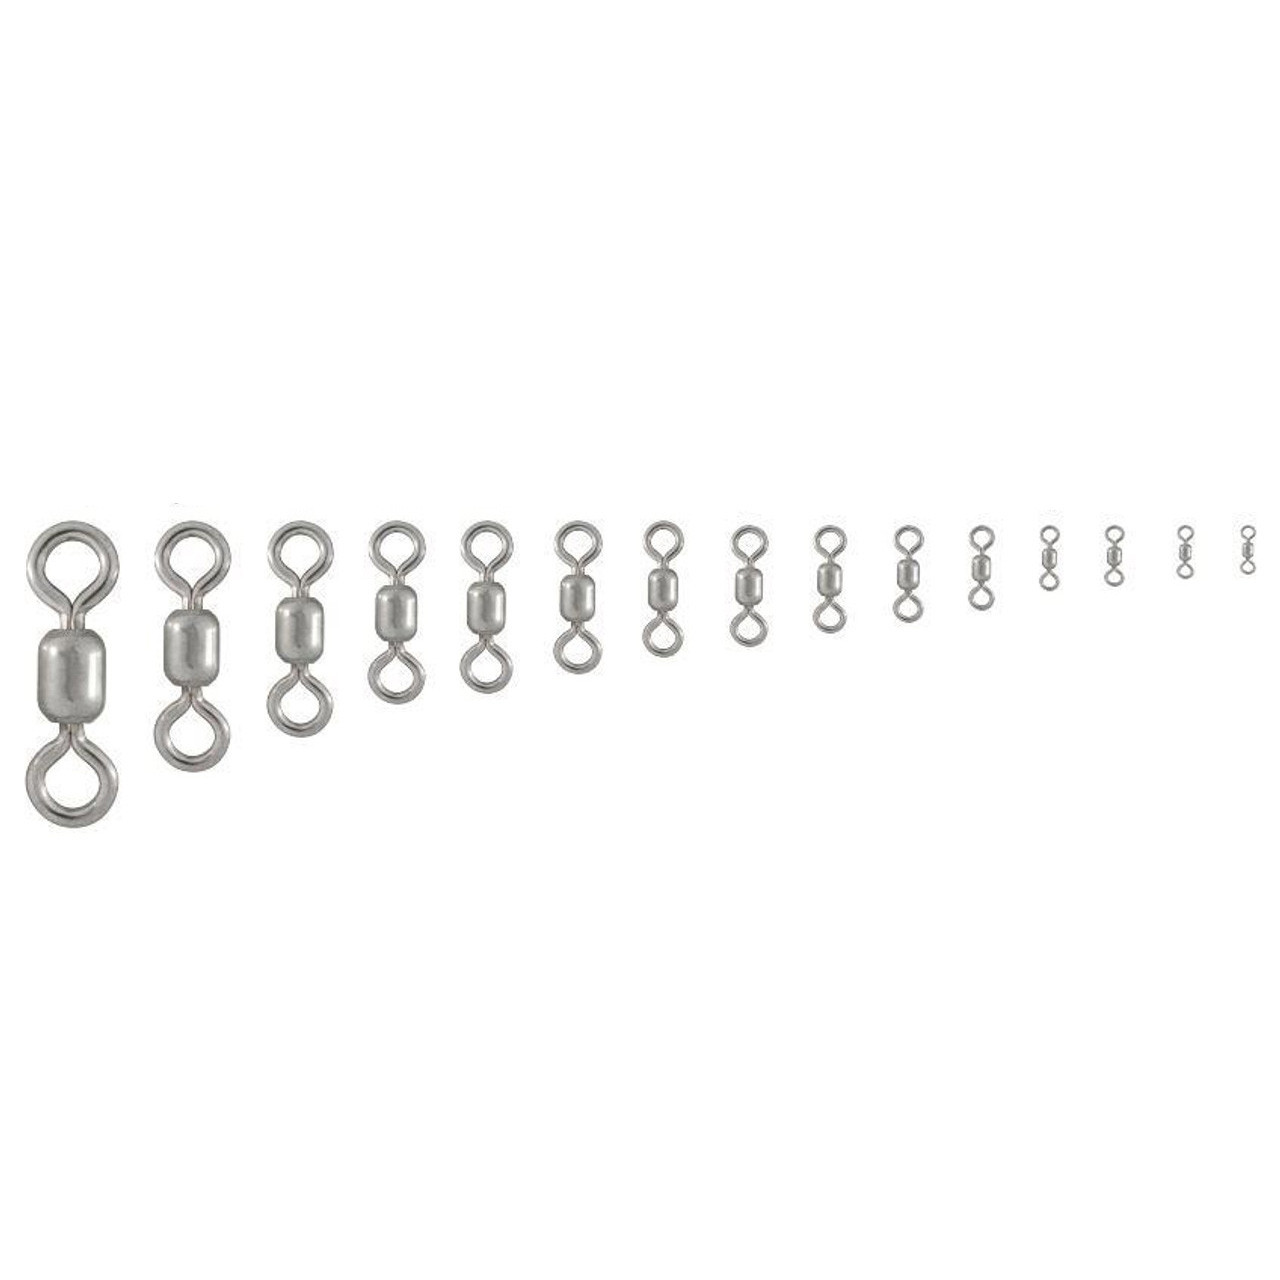 Fish-Field Superior Stainless Steel Crane Swivels | Size #4